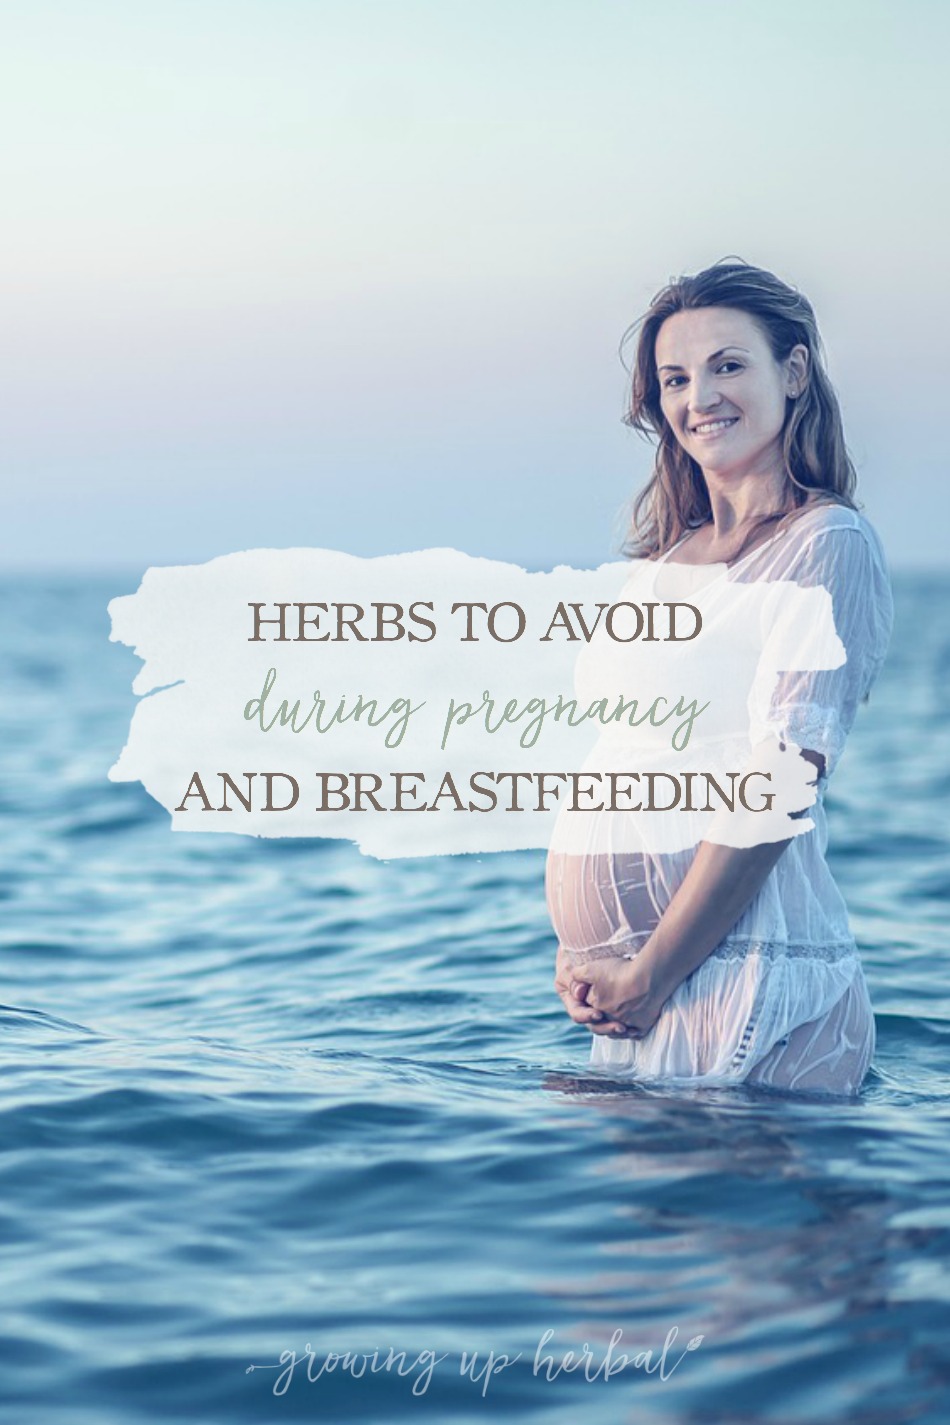 Herbs To Avoid During Pregnancy & Breastfeeding | Growing Up Herbal | Are you wondering about herbal safety during pregnancy and breastfeeding? Here's several herbs to avoid during pregnancy, as well as a few that are safe.